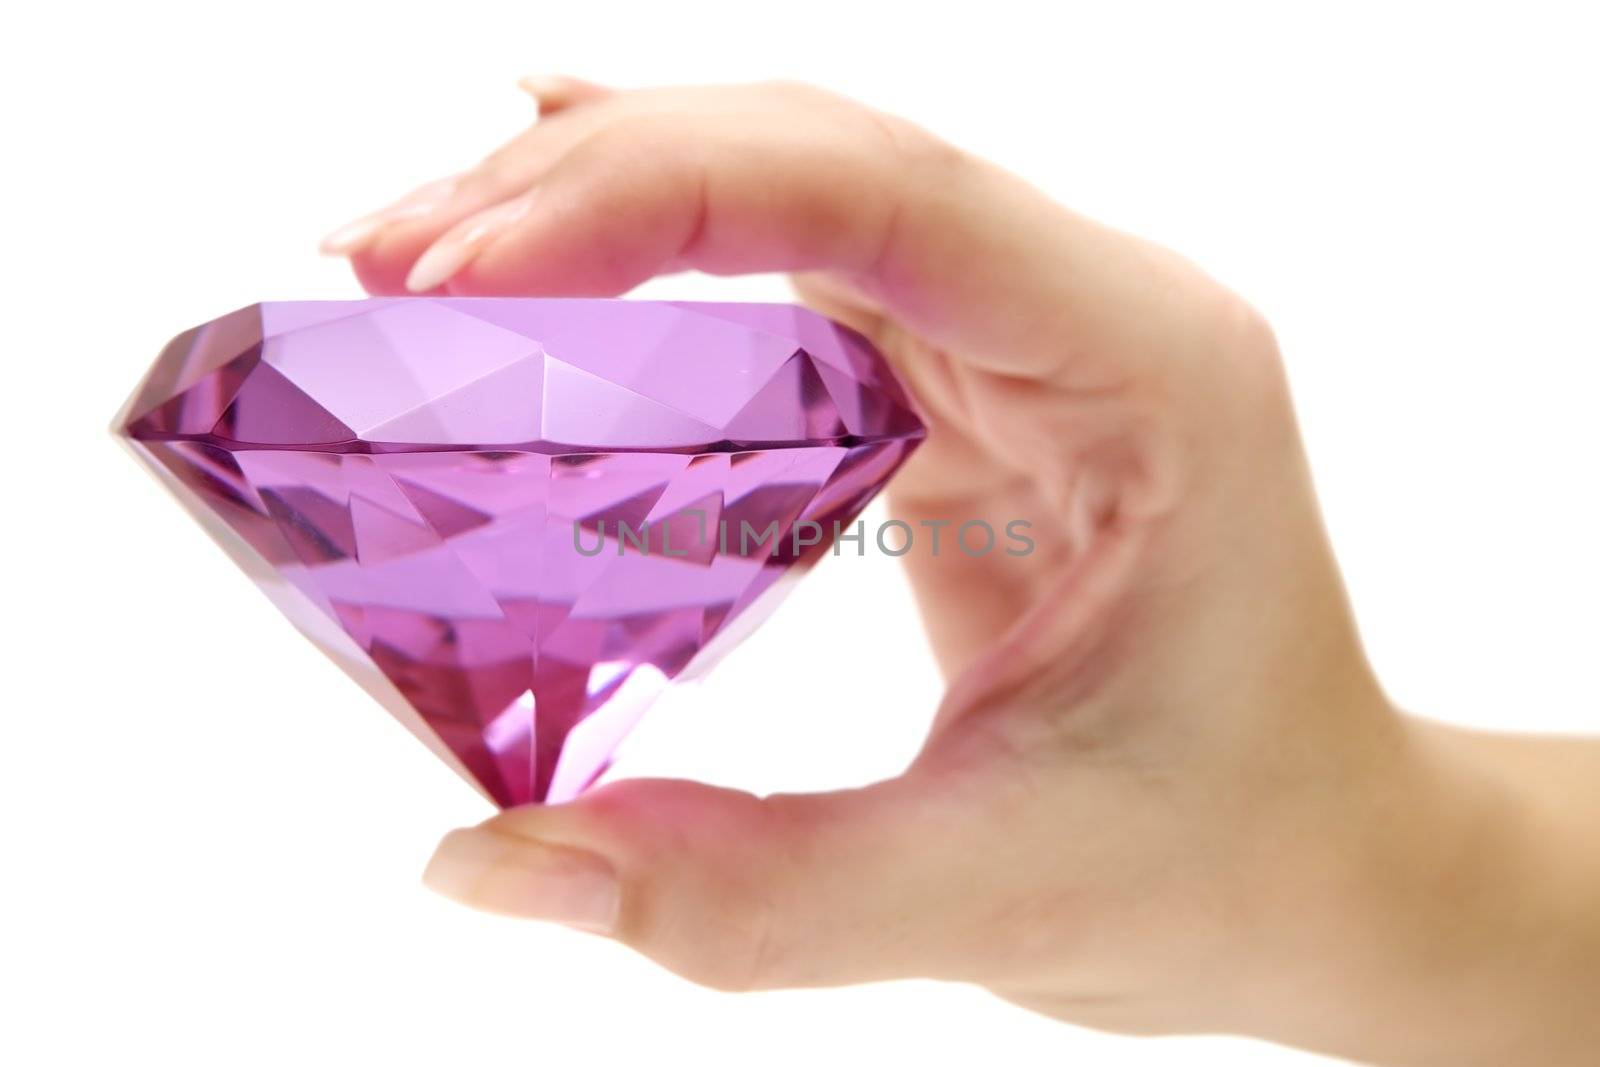 Female hand holding a precious gem. Isolated on a white background.